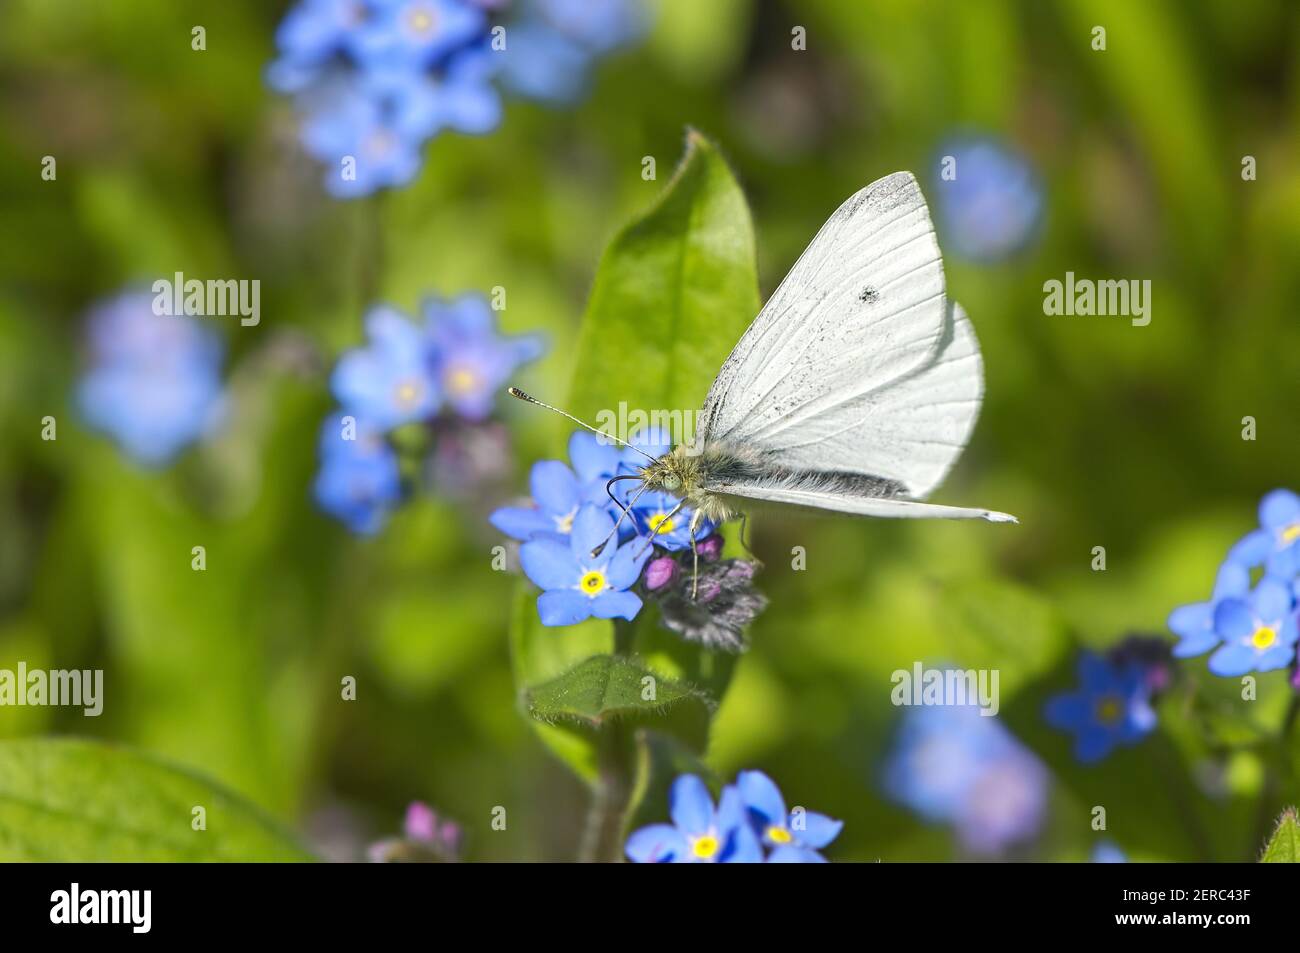 Small White Cabbage butterfly (Pieris rapae) on a Common Forget-me-not flower (Myosotis arvensis). Stock Photo